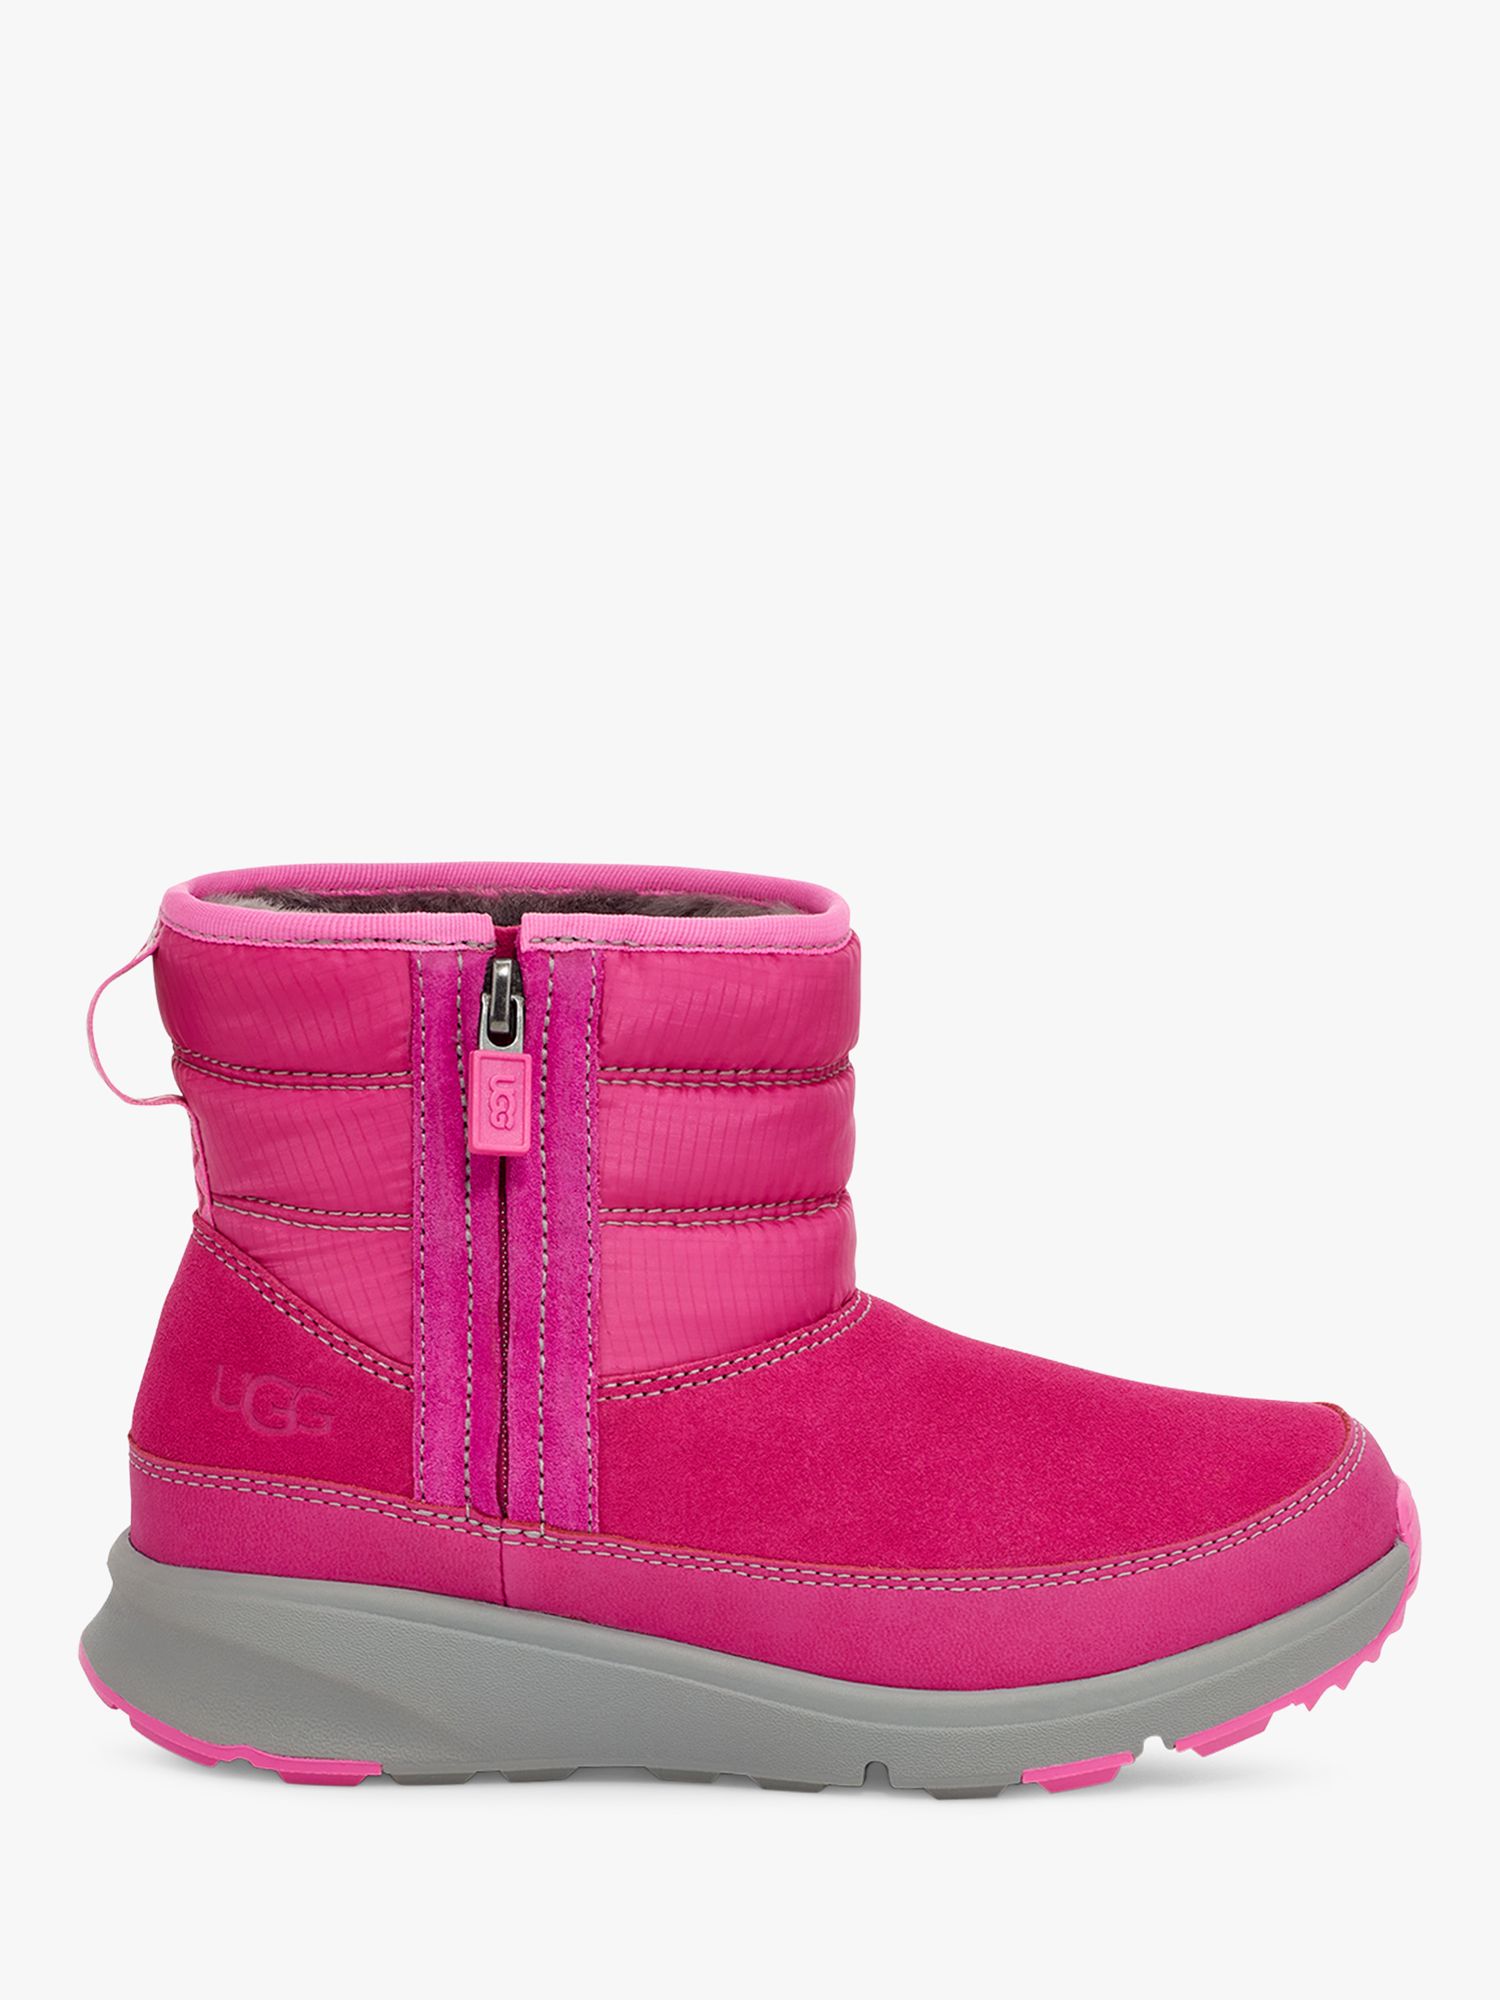 UGG Kids' Truckee Weather Boots at John Lewis & Partners